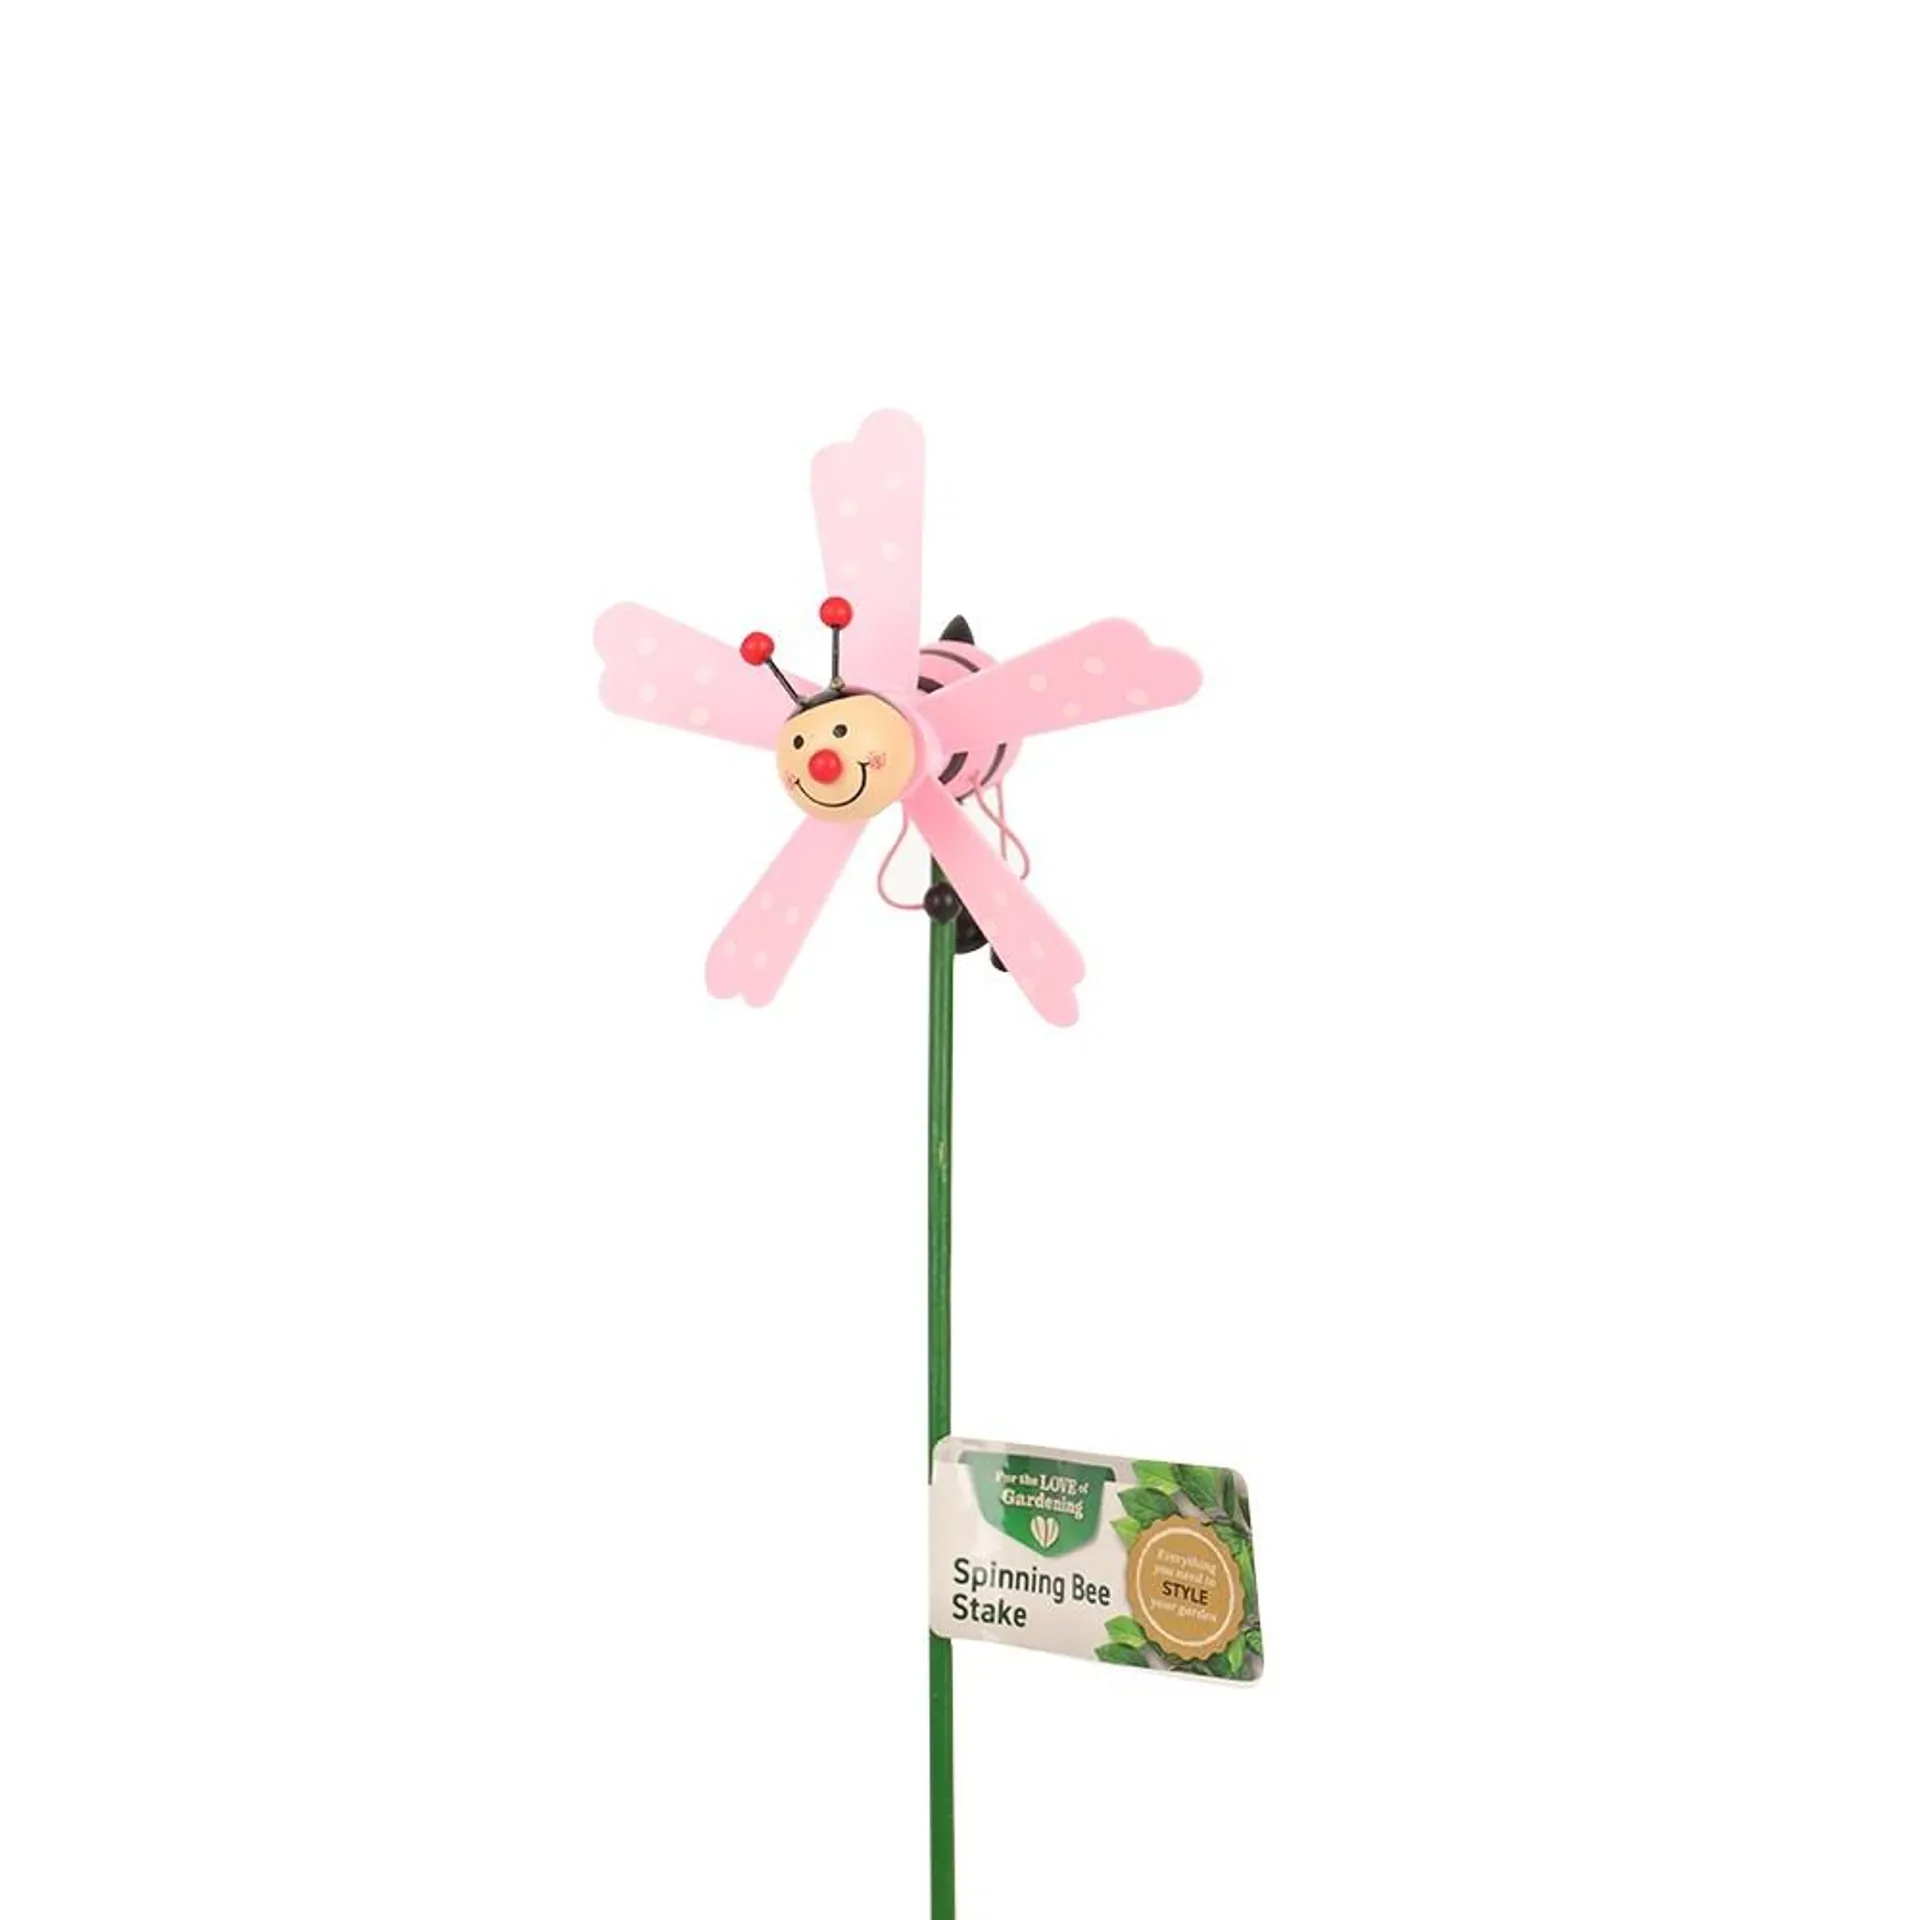 DECORATIVE SPINNING BEE STAKE - PINK